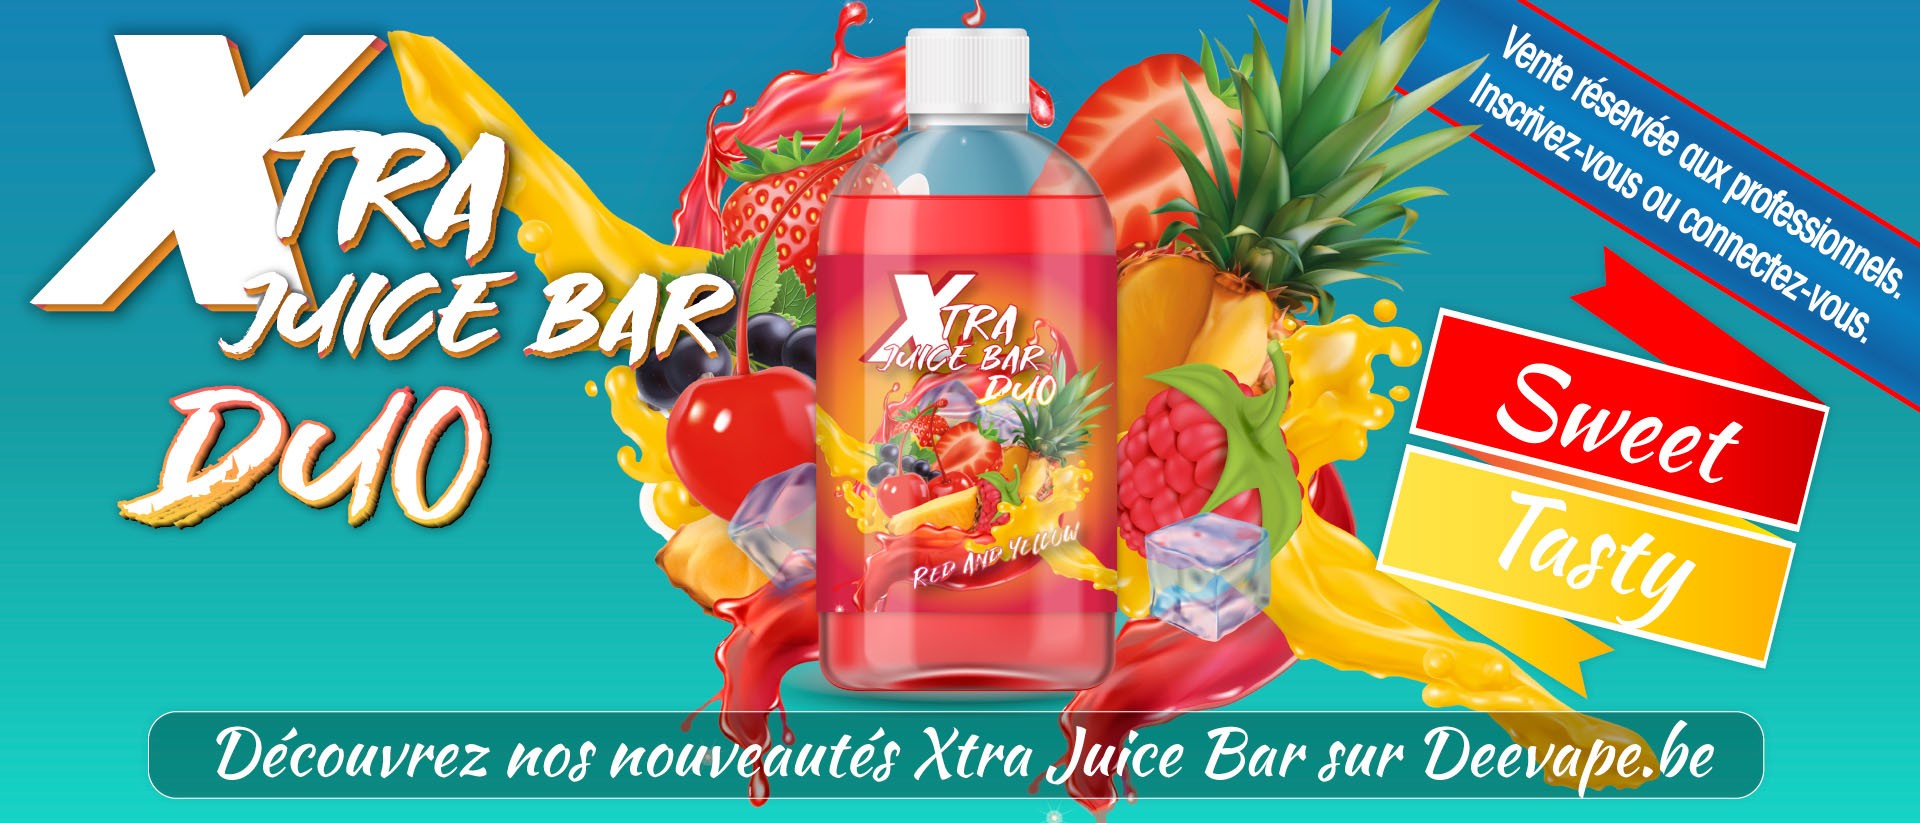 NOUVEAU XTRA JUICE BAR DUO RED AND YELLOW